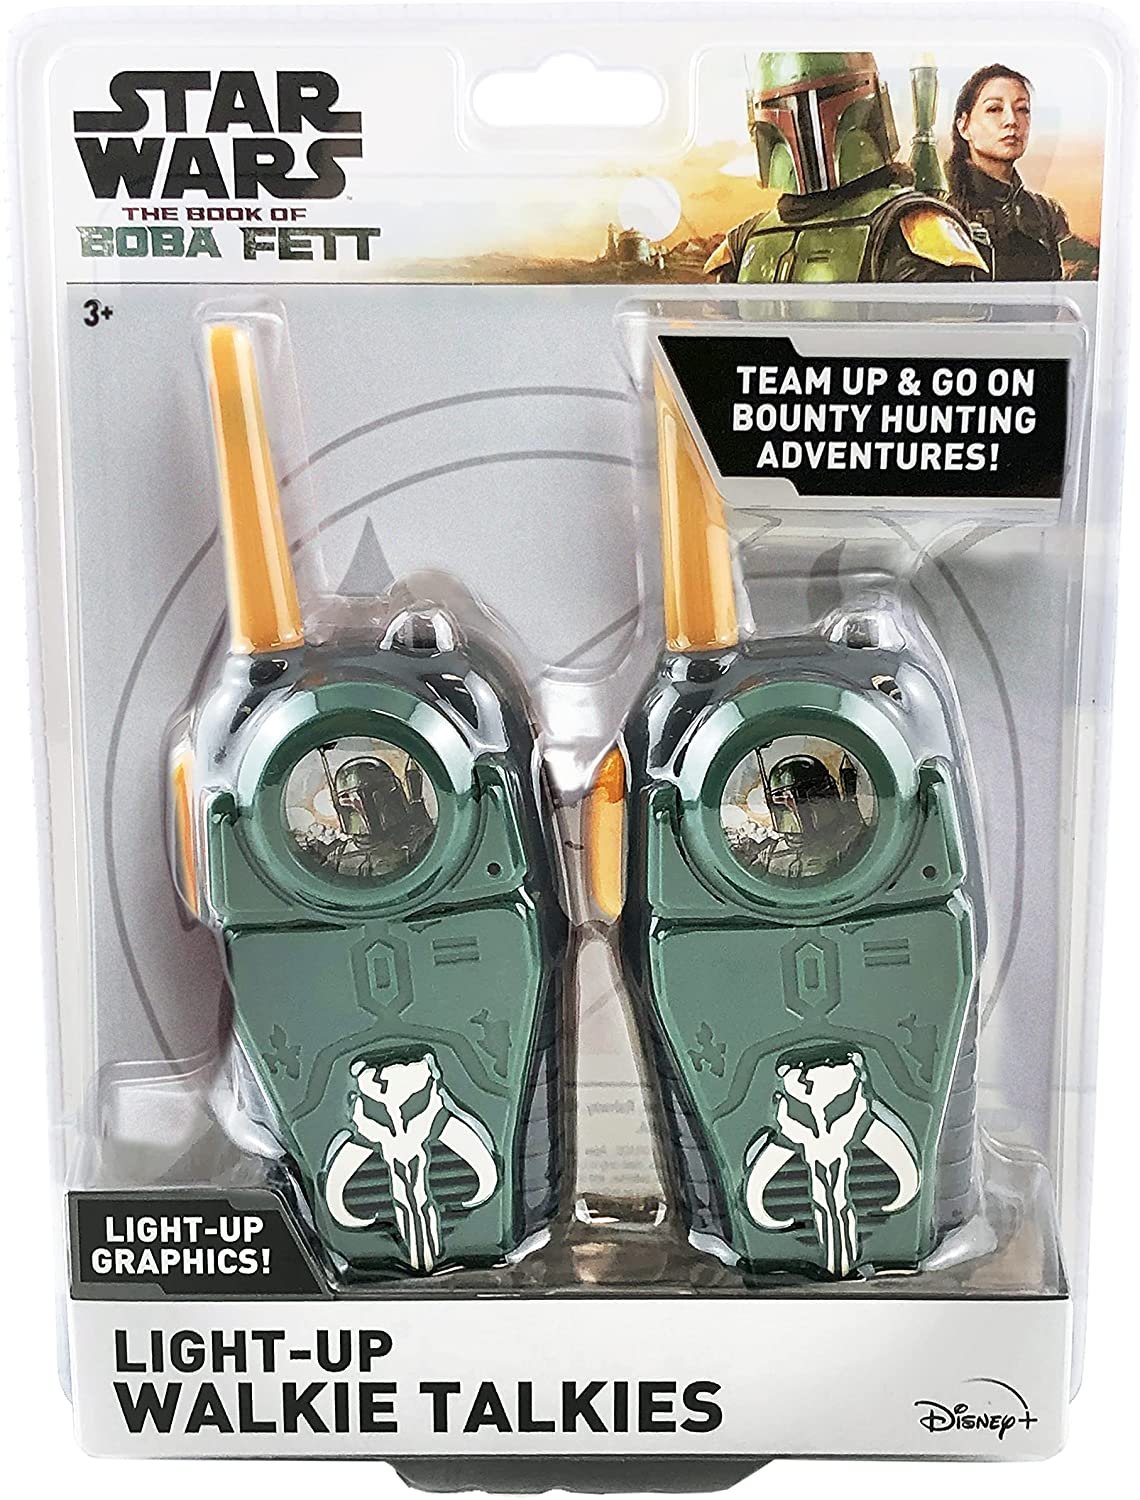 ekids The Book of Boba Fett Toy Walkie Talkies for Kids, Two Way Radios for Indoor and Outdoor Games - image 3 of 7